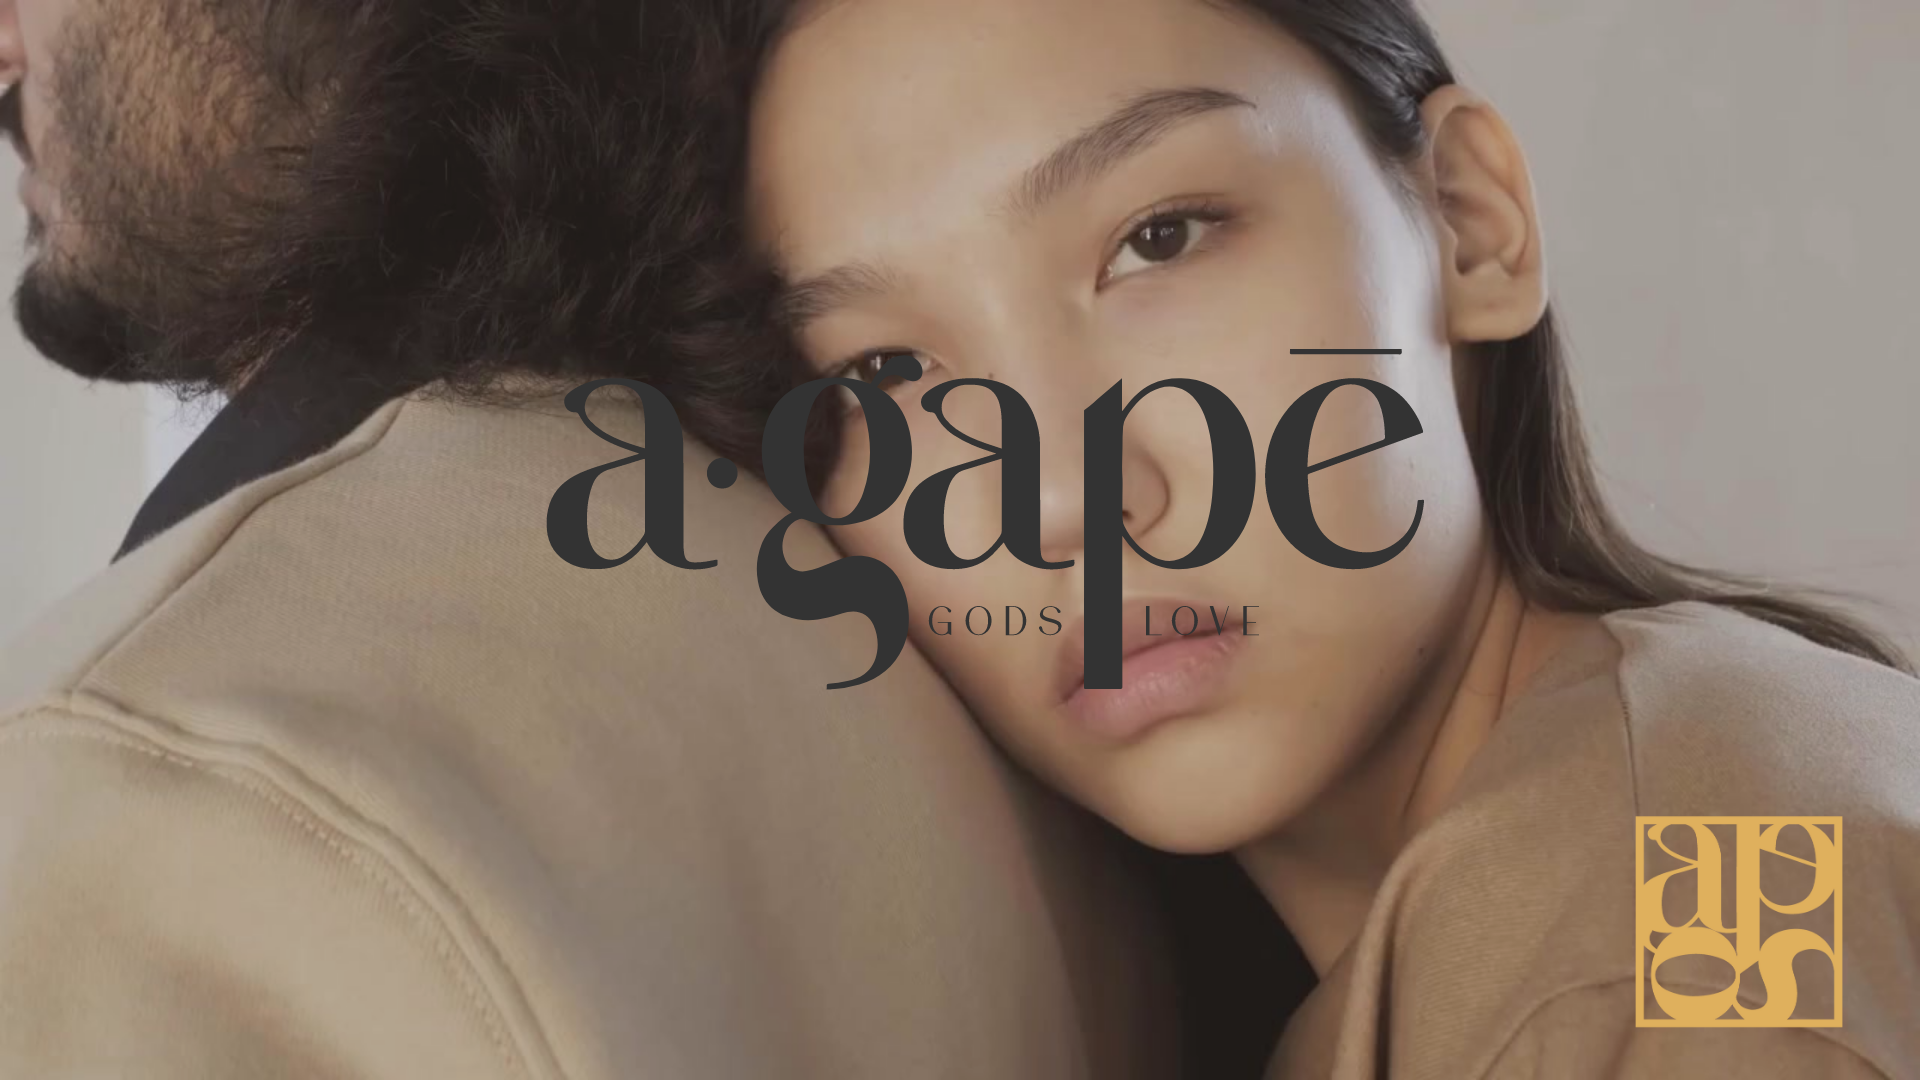 Load video: Agape Co. Gods Love brand introduction video showcasing intentional wellness, love and the product catalog provided by Agape Co. This video features sound and clean images.